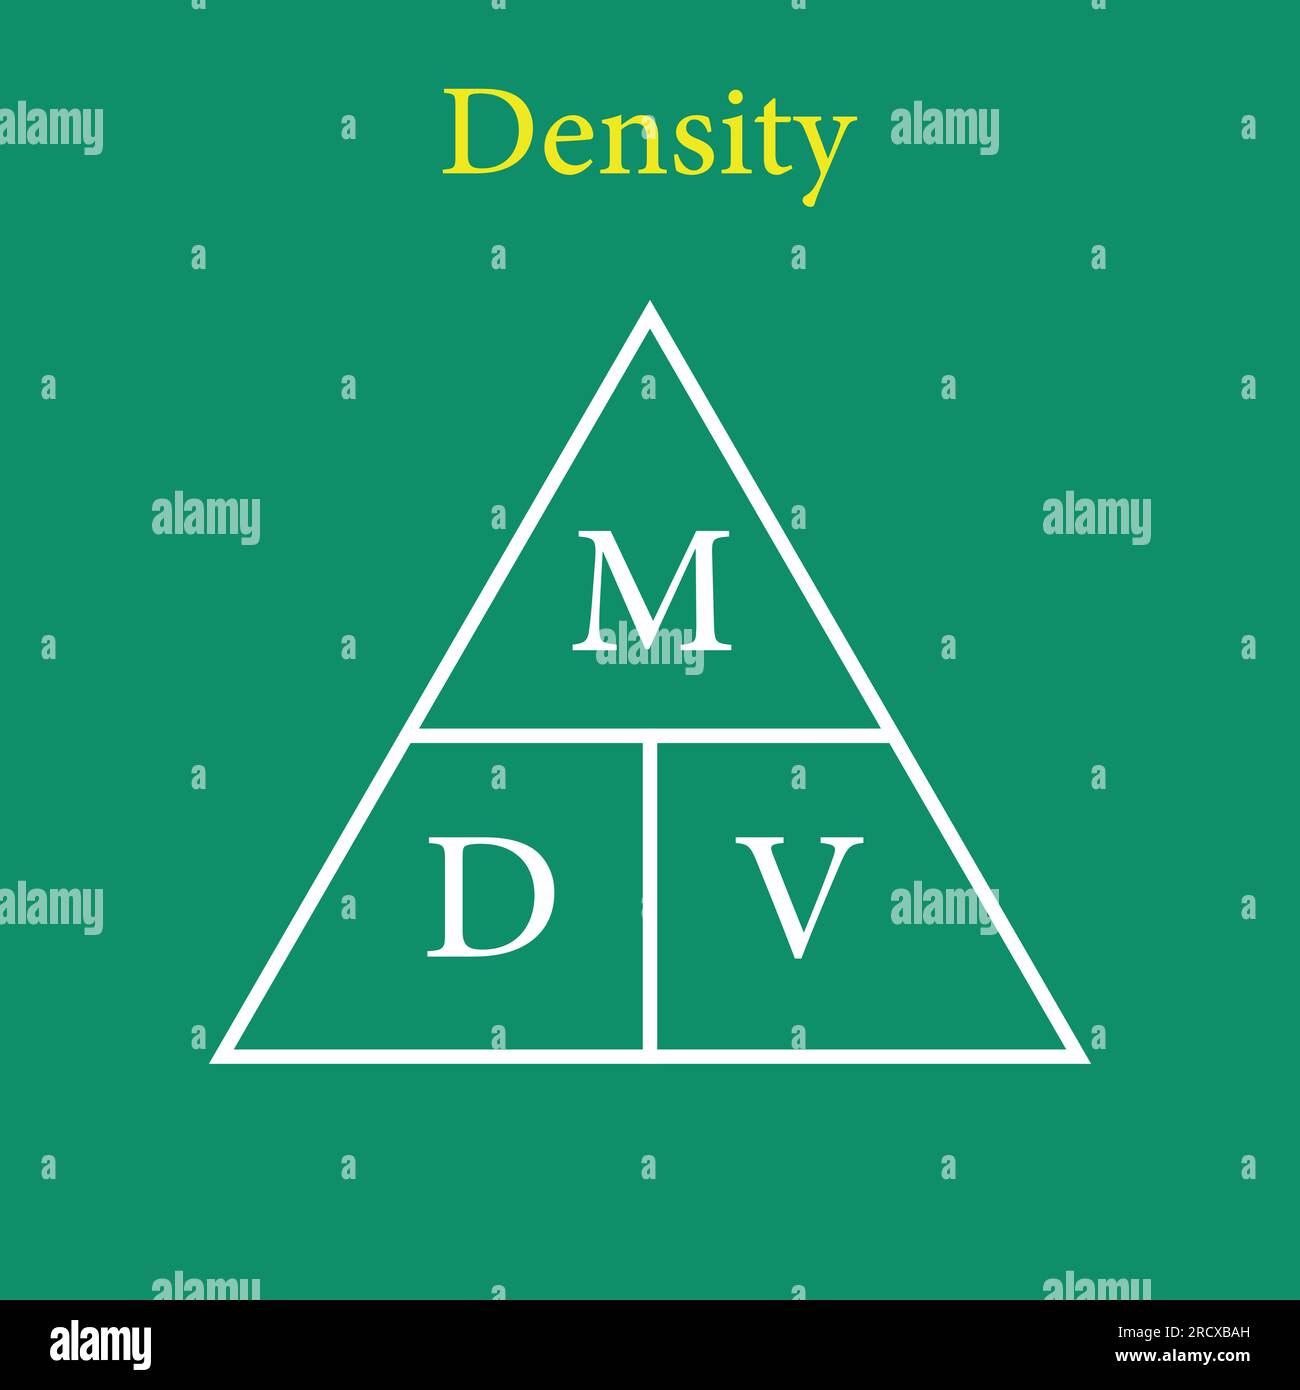 Density, mass and volume triangle formula in chemistry. Vector illustration isolated on chalkboard. Stock Vector